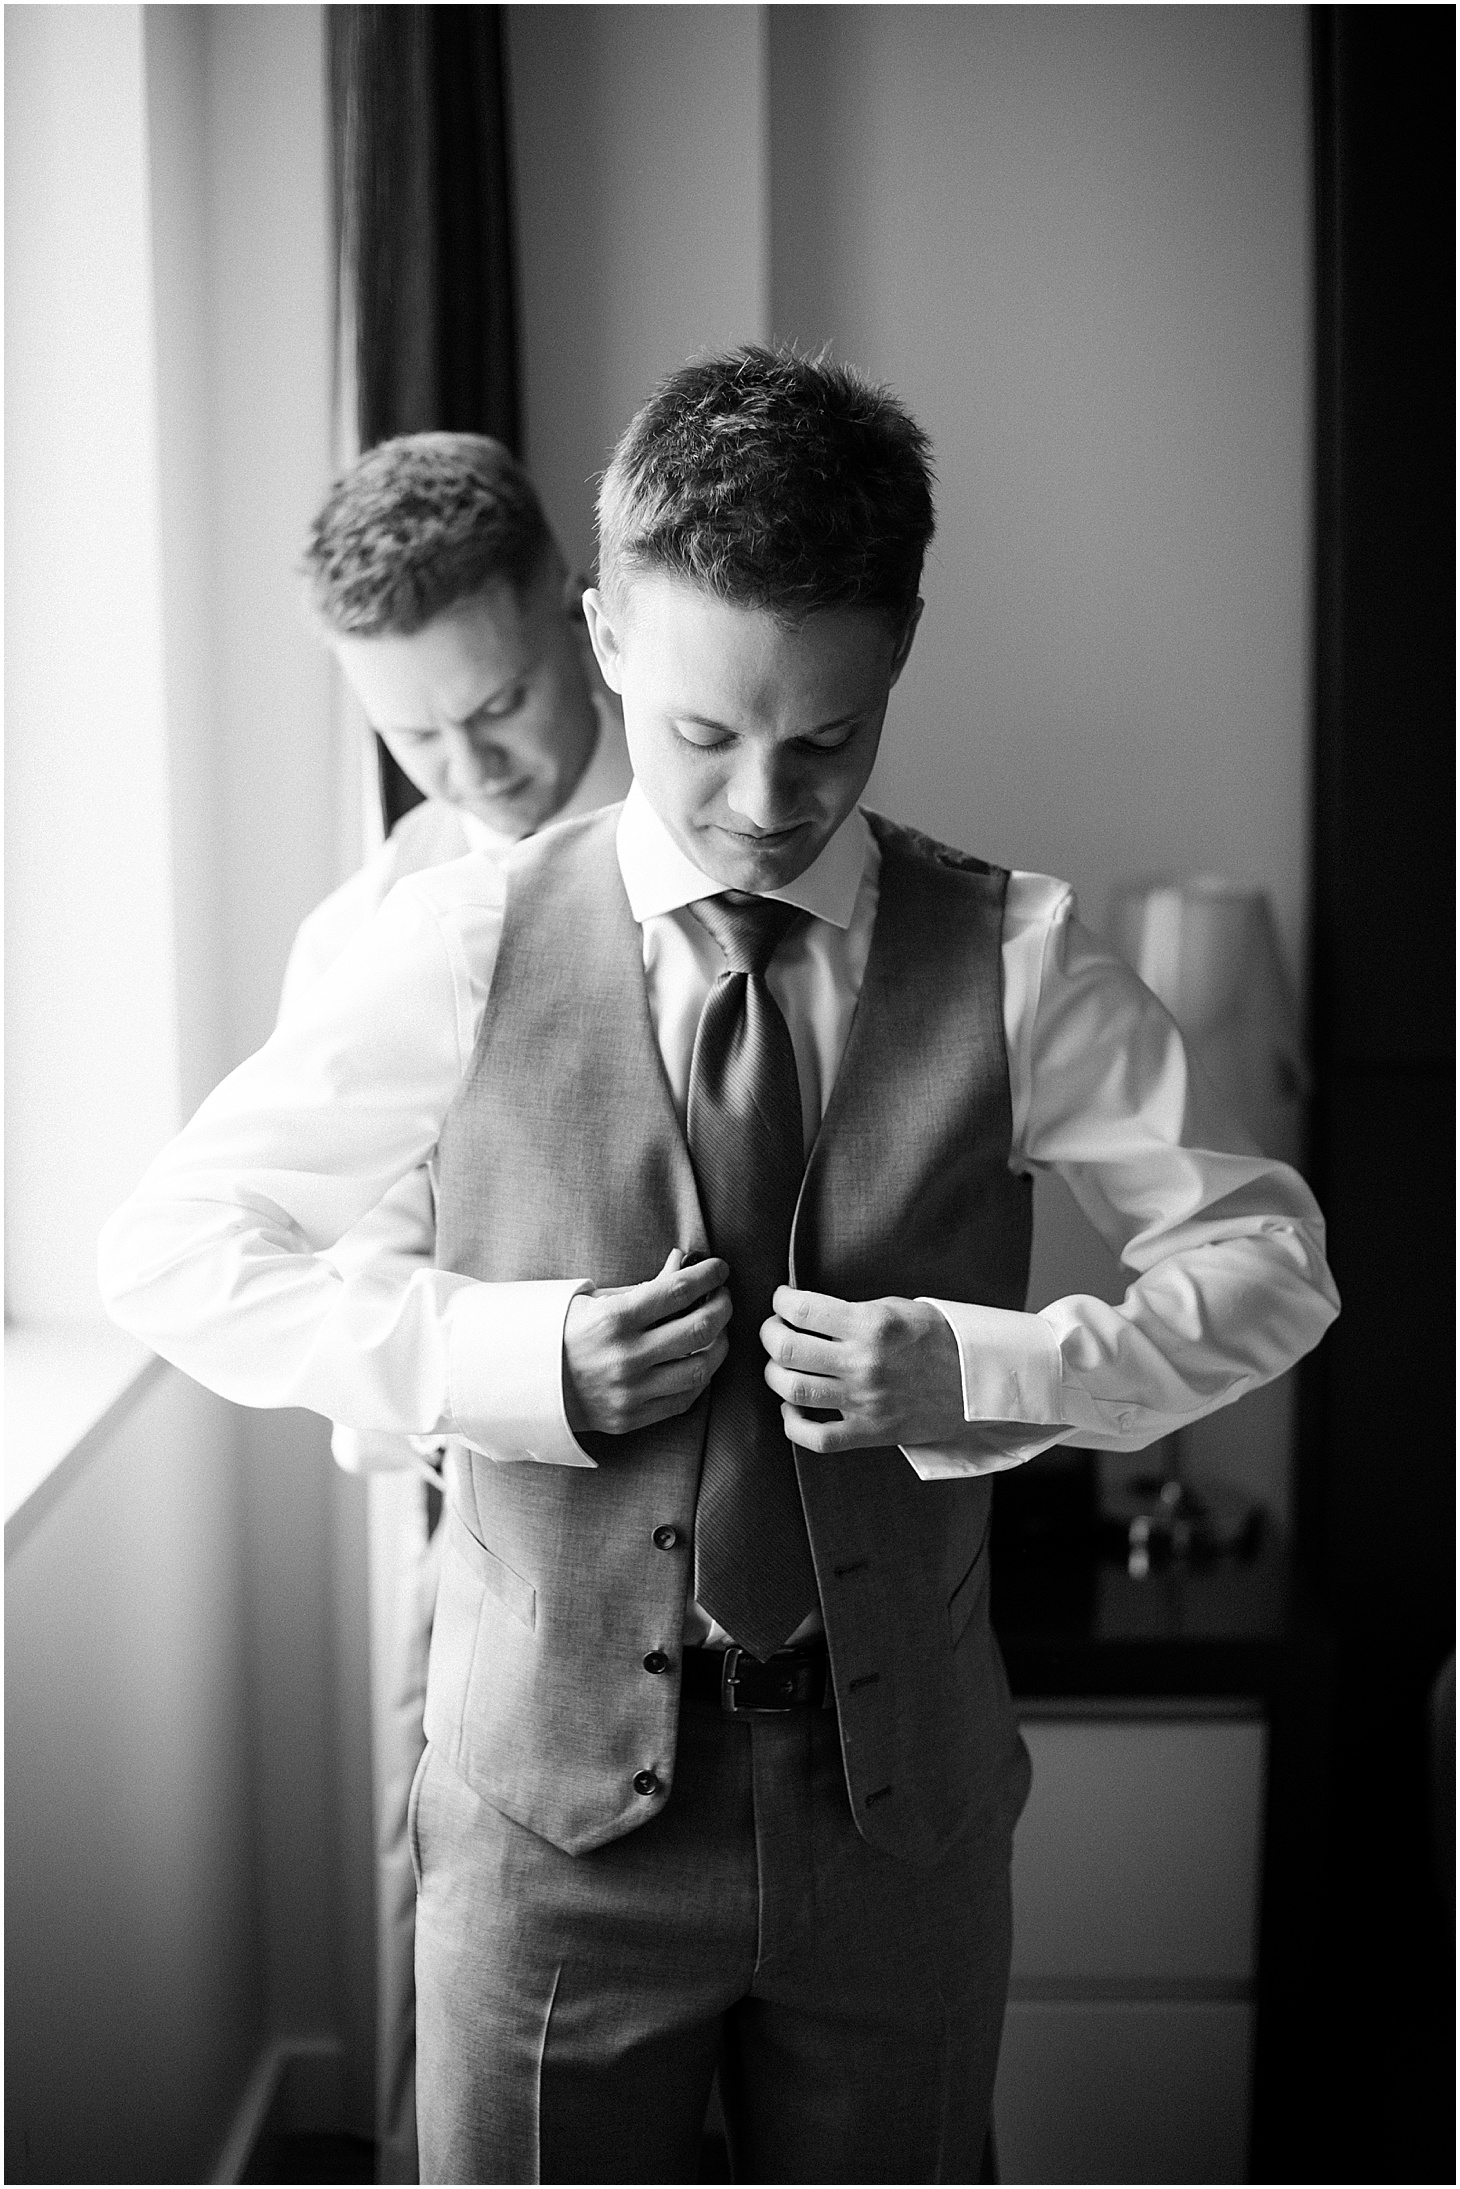 Groom Getting Ready at Kimpton Donovan Hotel, Dusty Blue and Pink Jewish Wedding at Women in the Arts, Sarah Bradshaw Photography, DC Wedding Photographer 